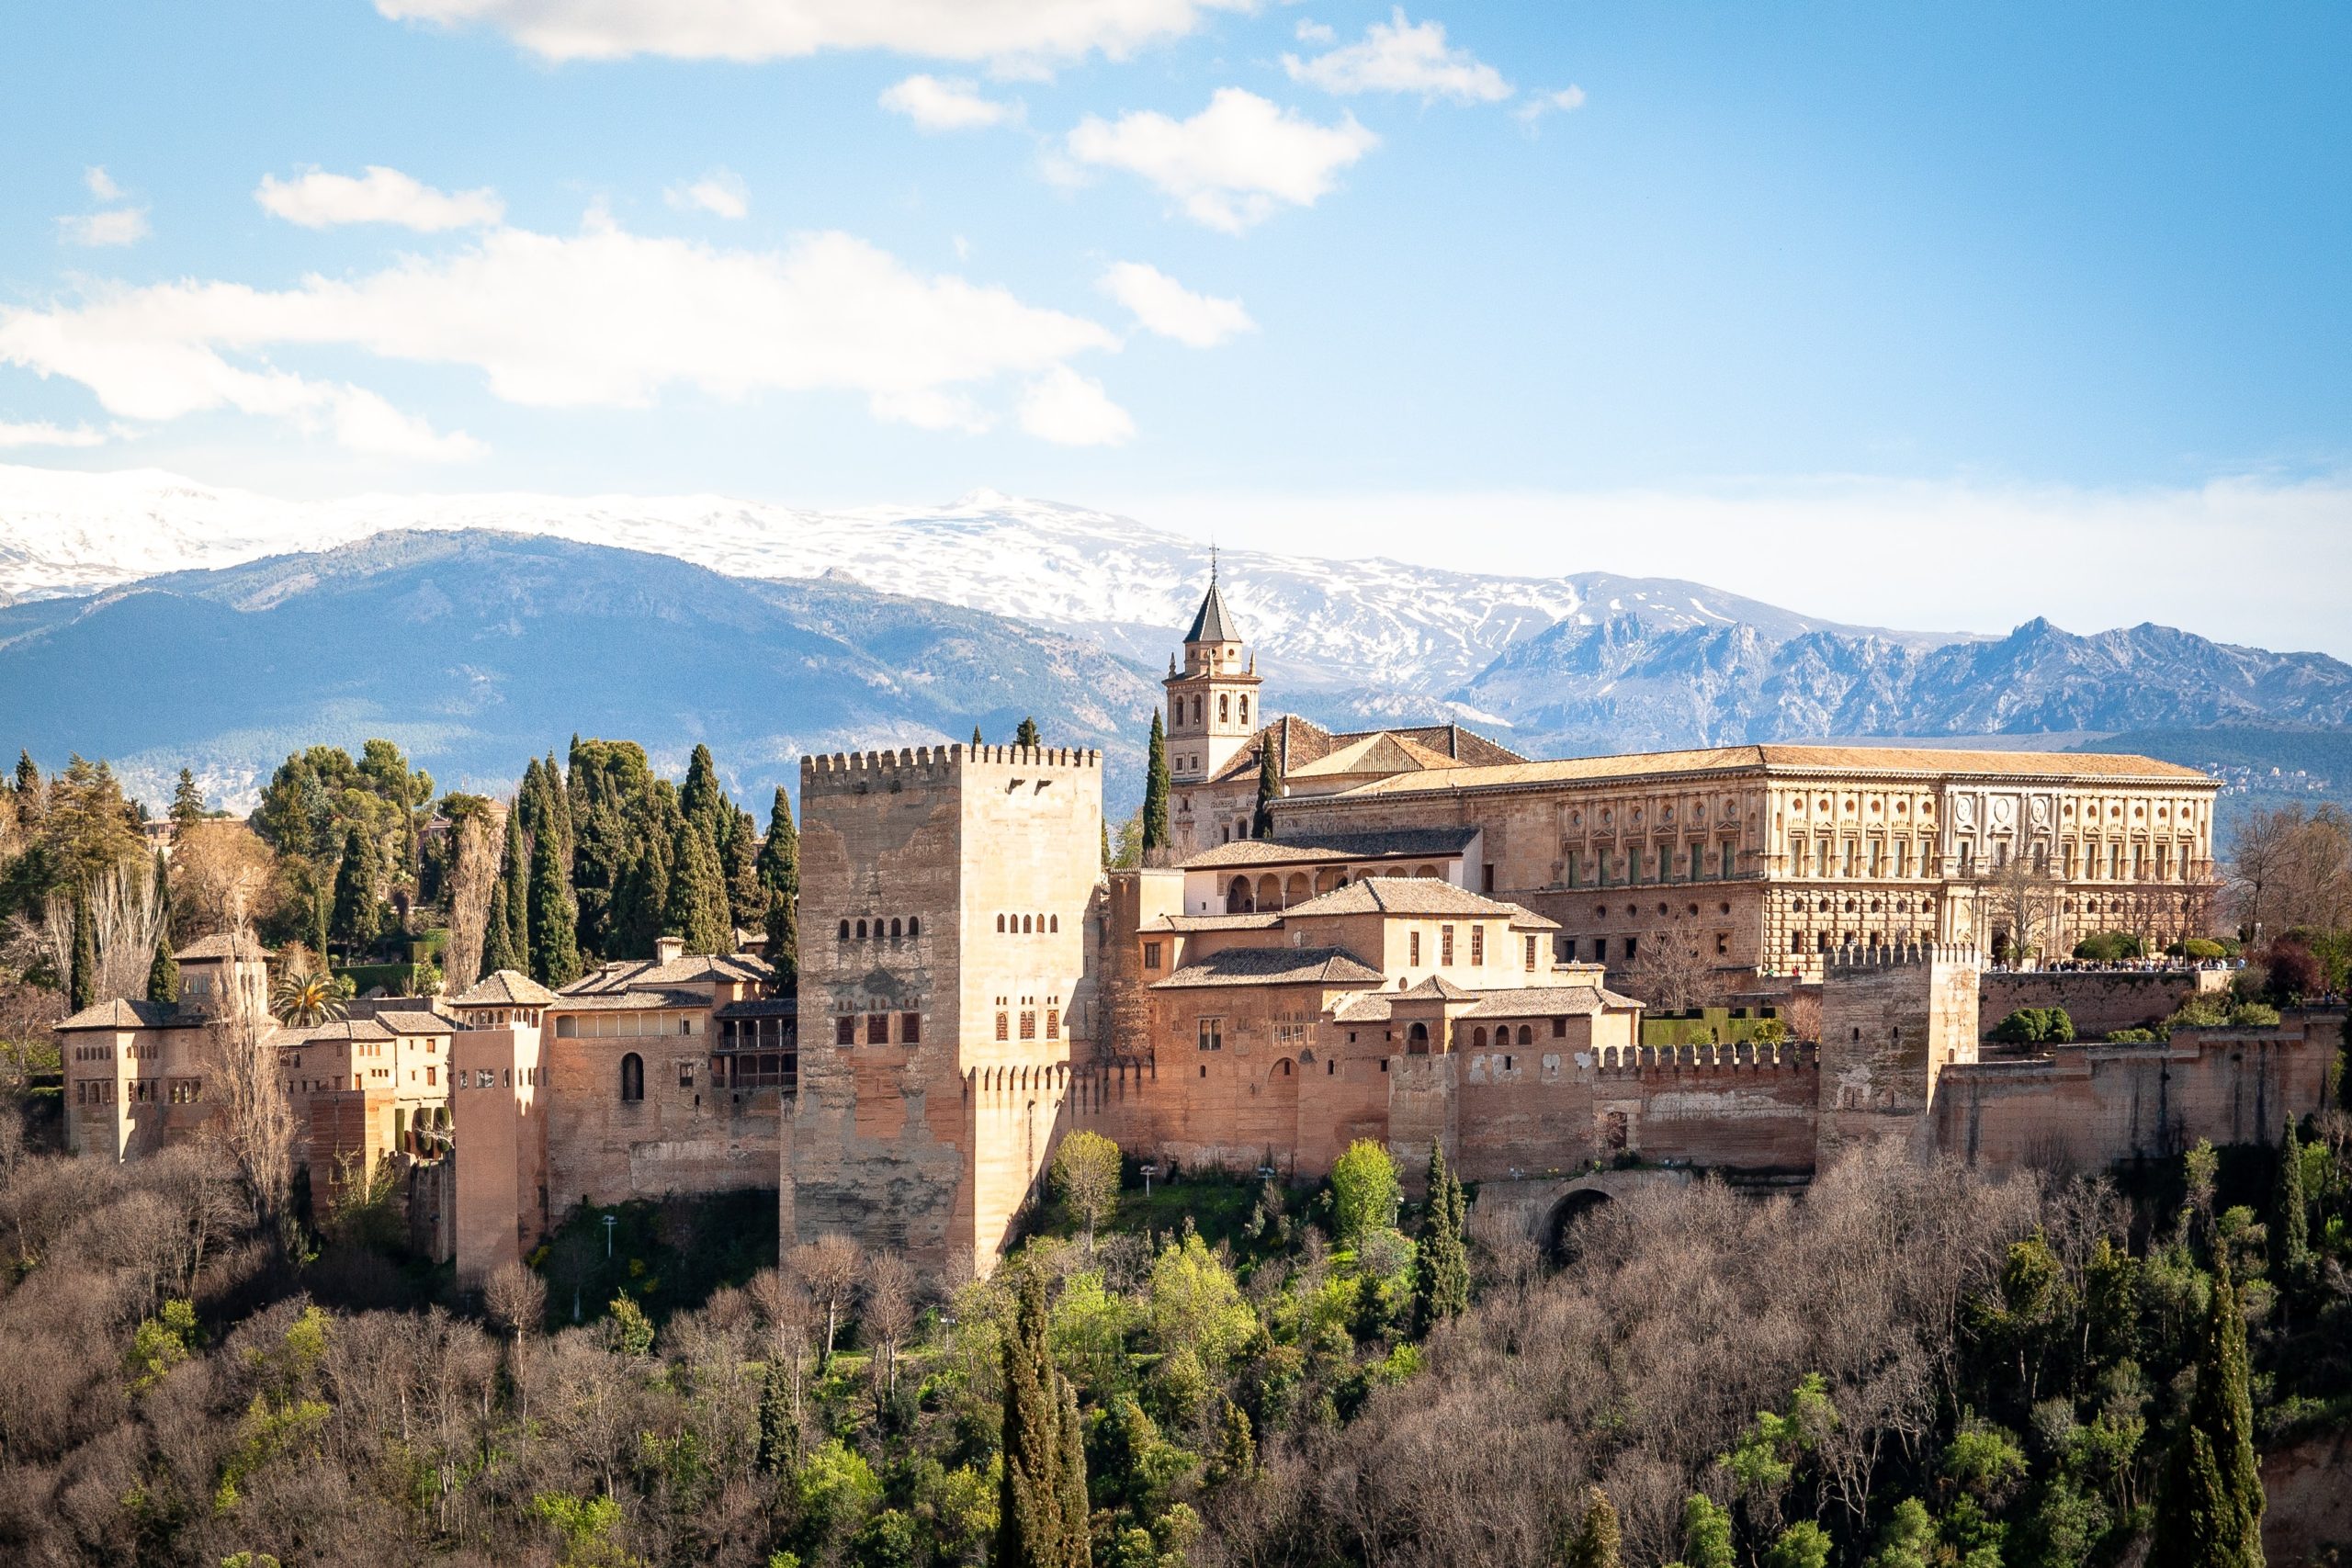 View of the Alhambra Palace in Granada Spain by Dimitry B